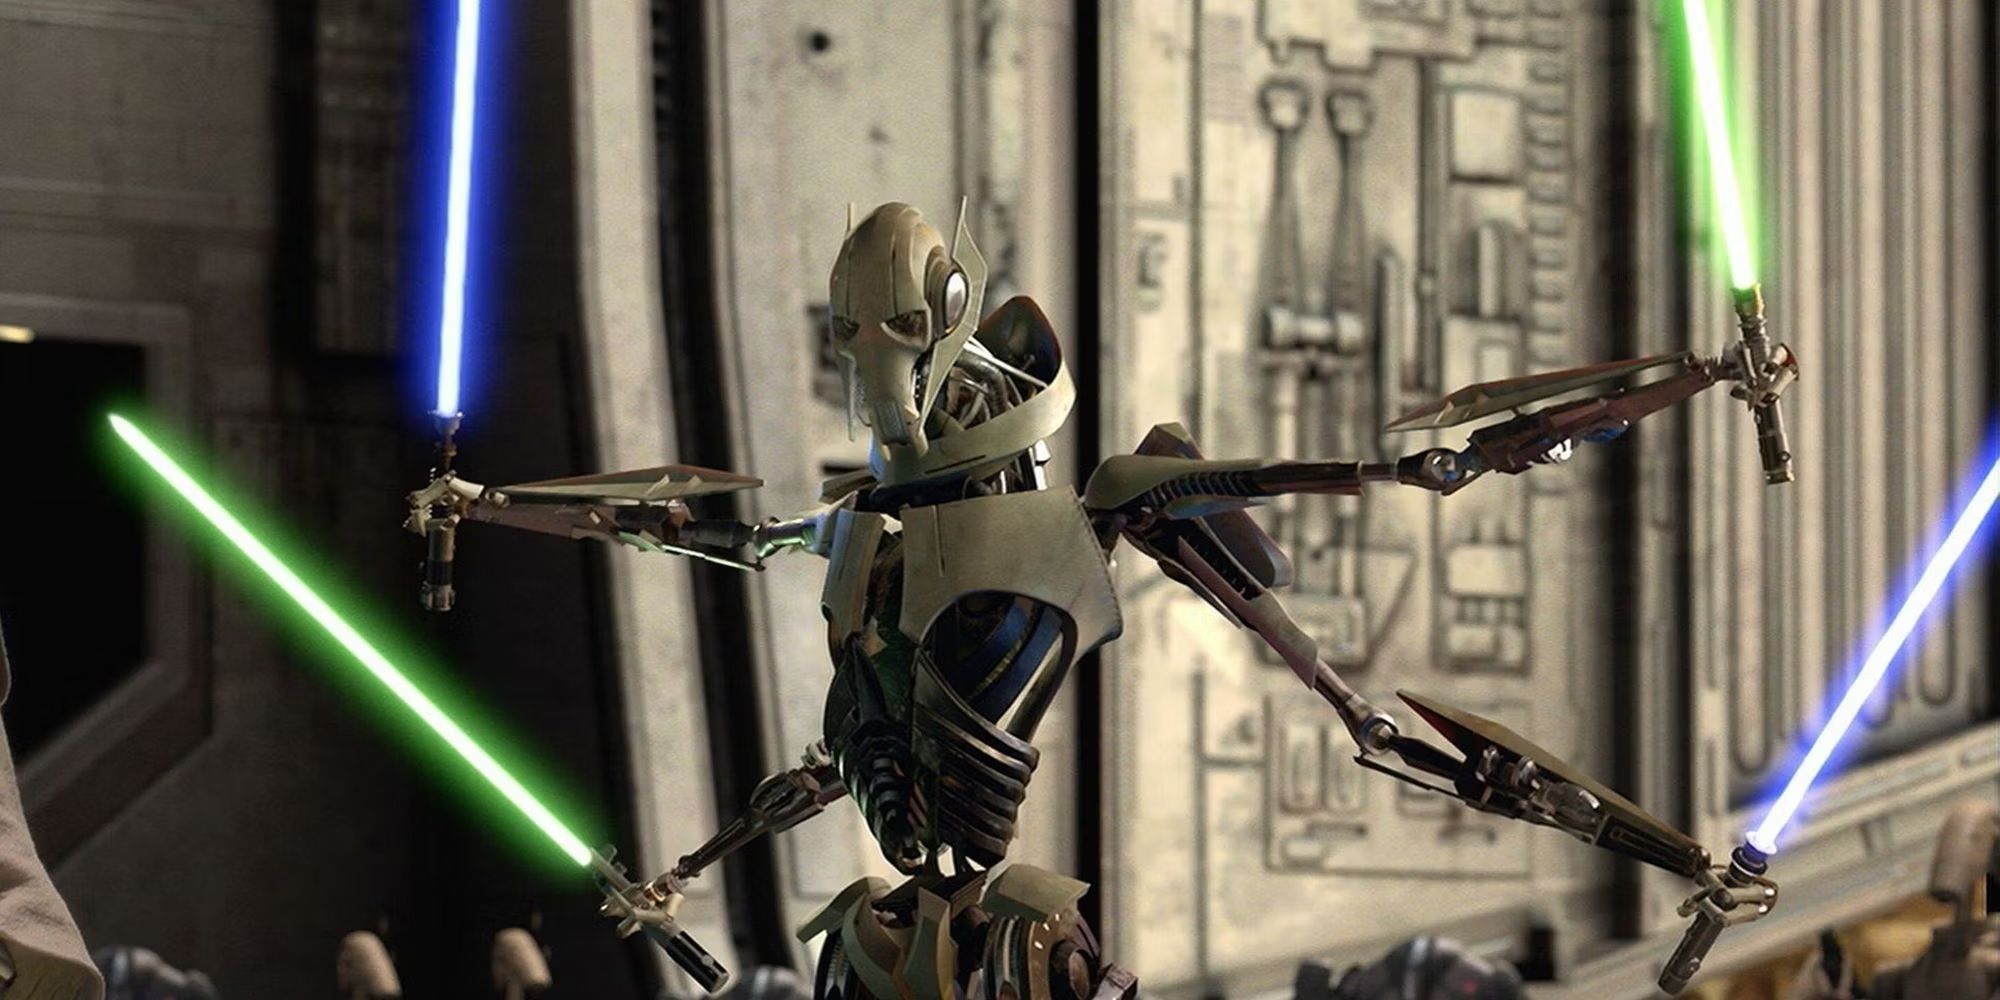 General Grievous with all four lightsabers in Revenge of the Sith